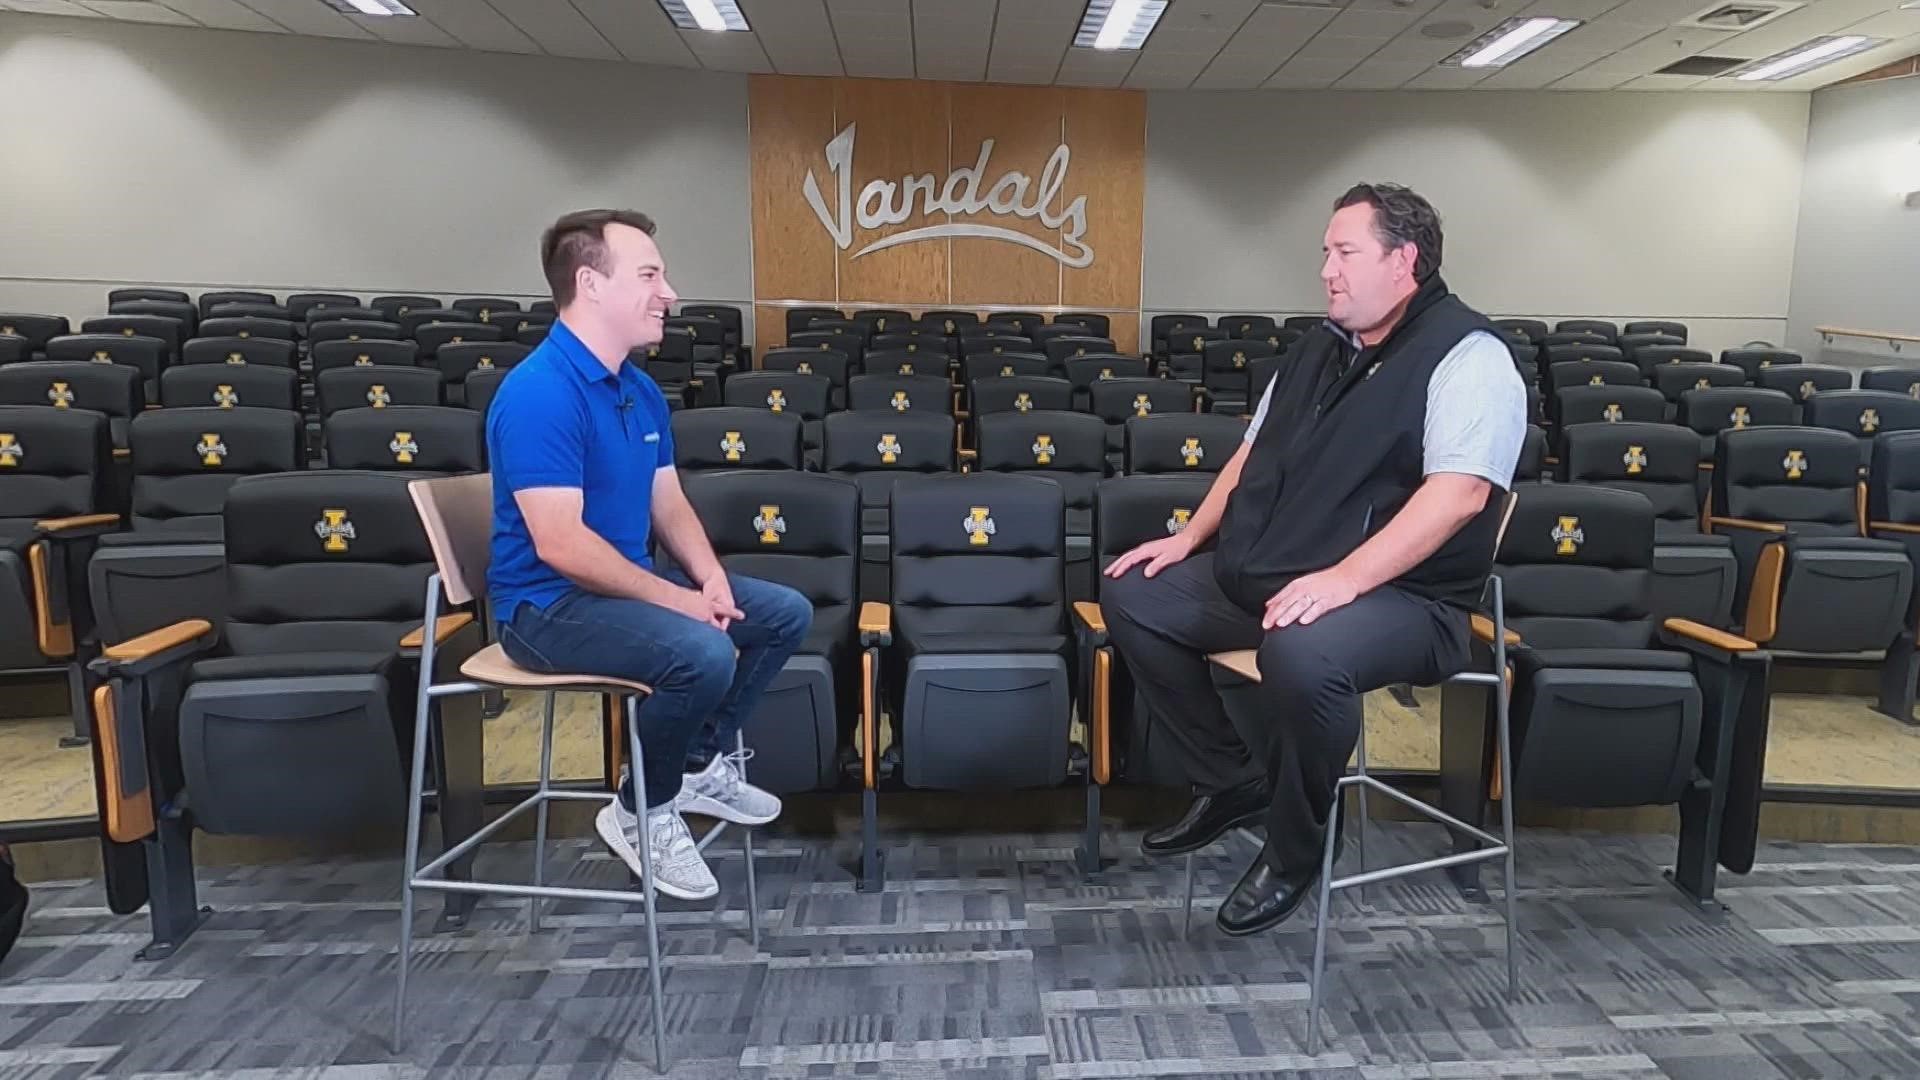 Hear from Jason Eck on heading into his first season as head coach of the Vandals and the return of the Battle of the Palouse.